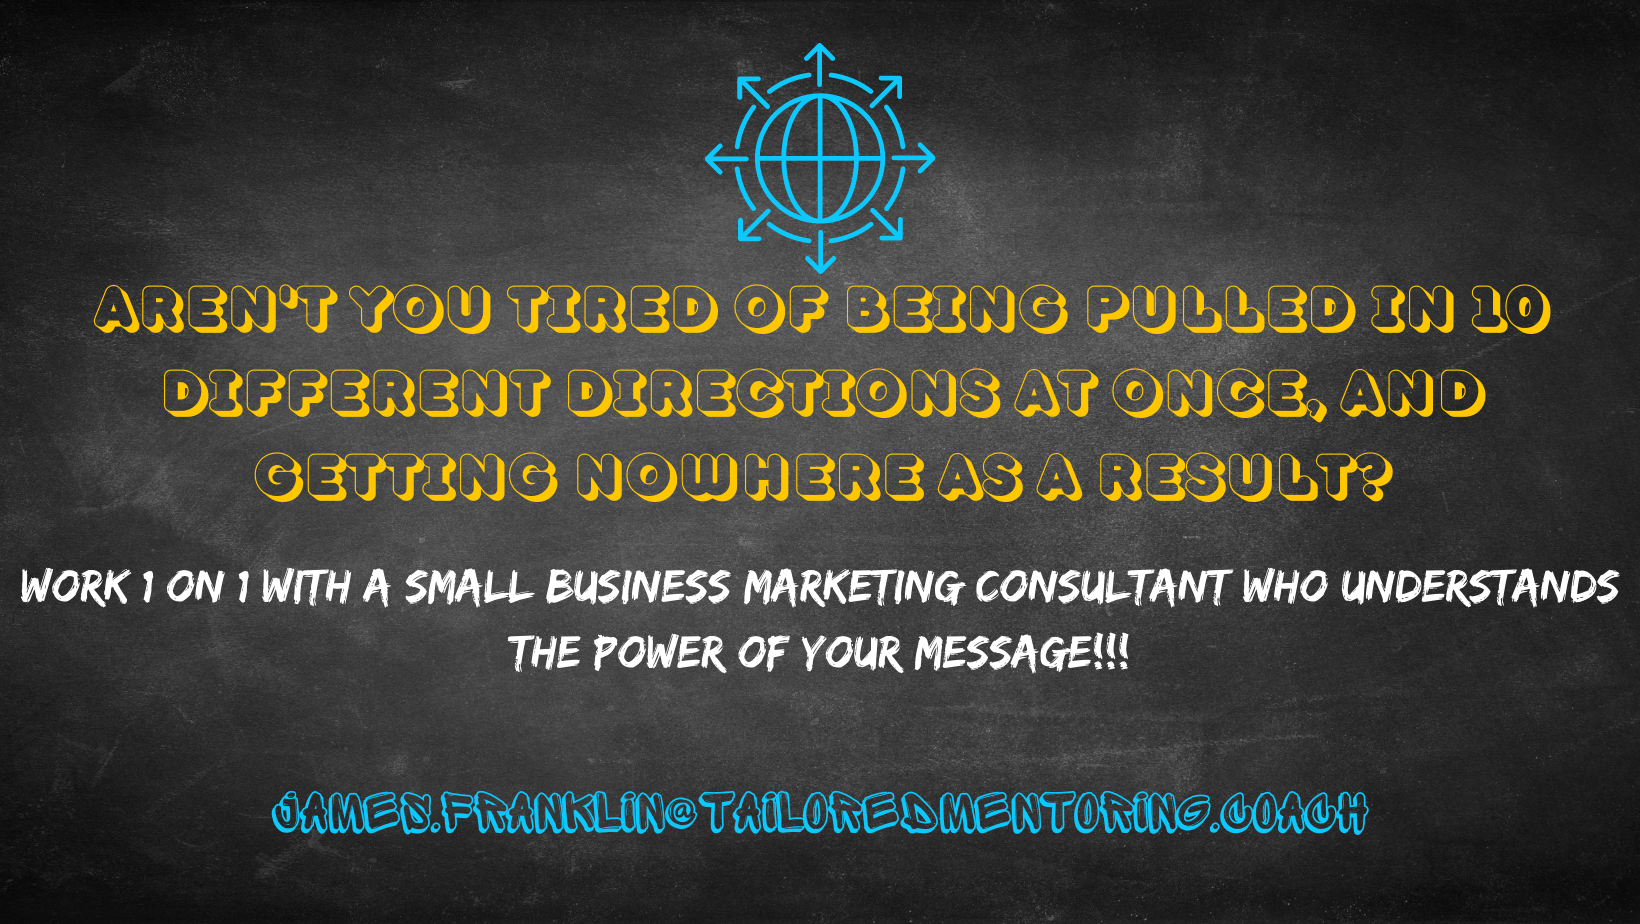 Work with a small business marketing consultant and get some accountability in your business.